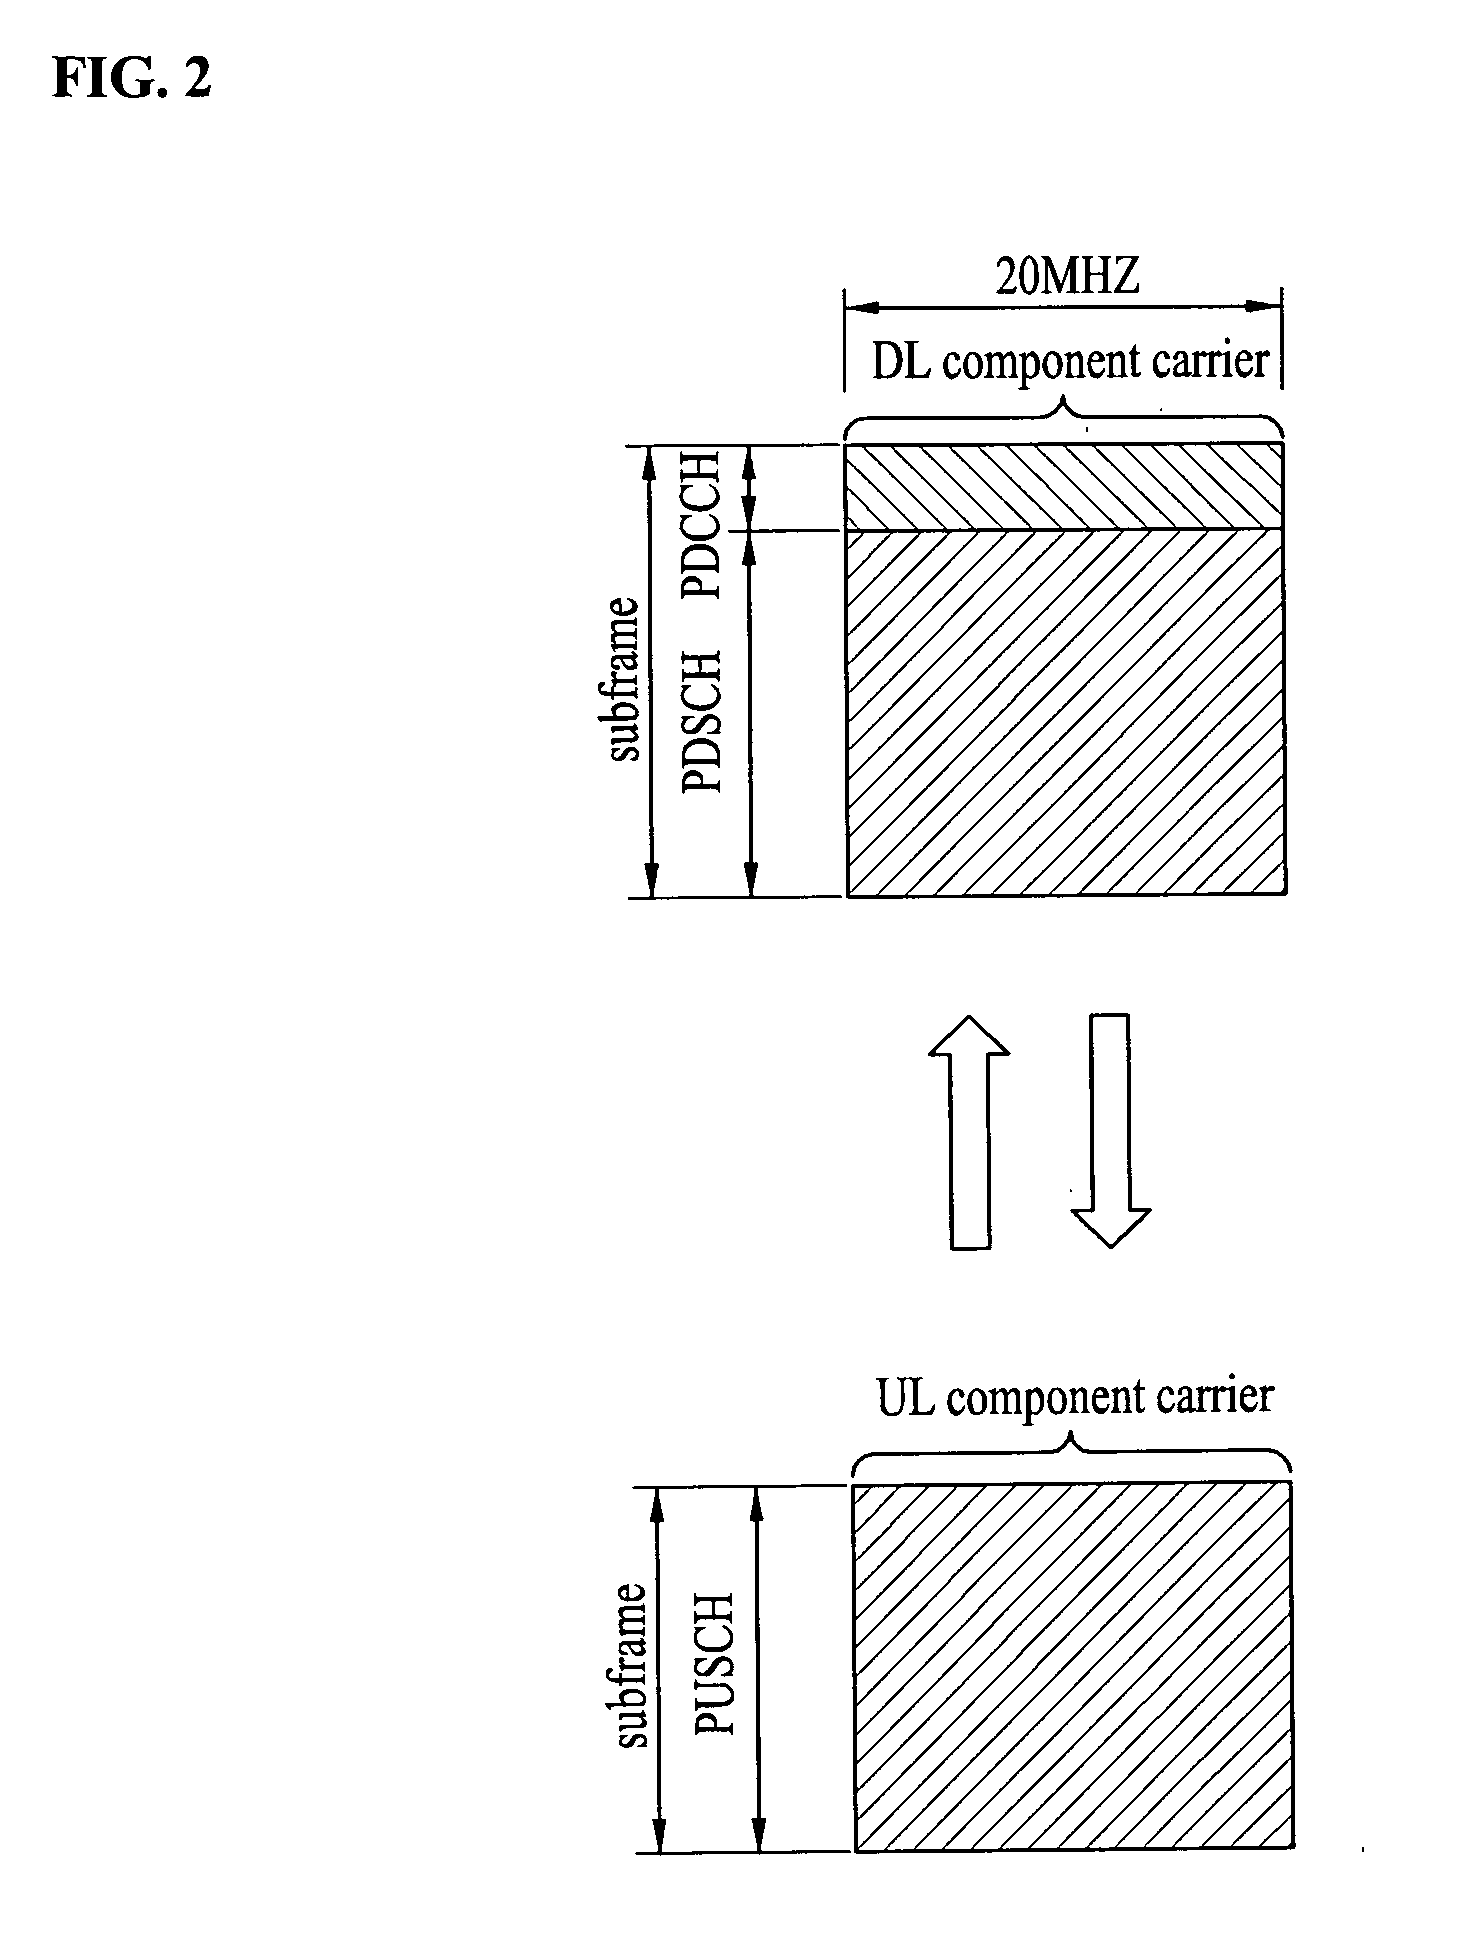 Method for wireless communication between user equipment and base station in wireless communication system supporting first user equipment that uses single frequency band and second user equipment that uses plurality of frequency bands